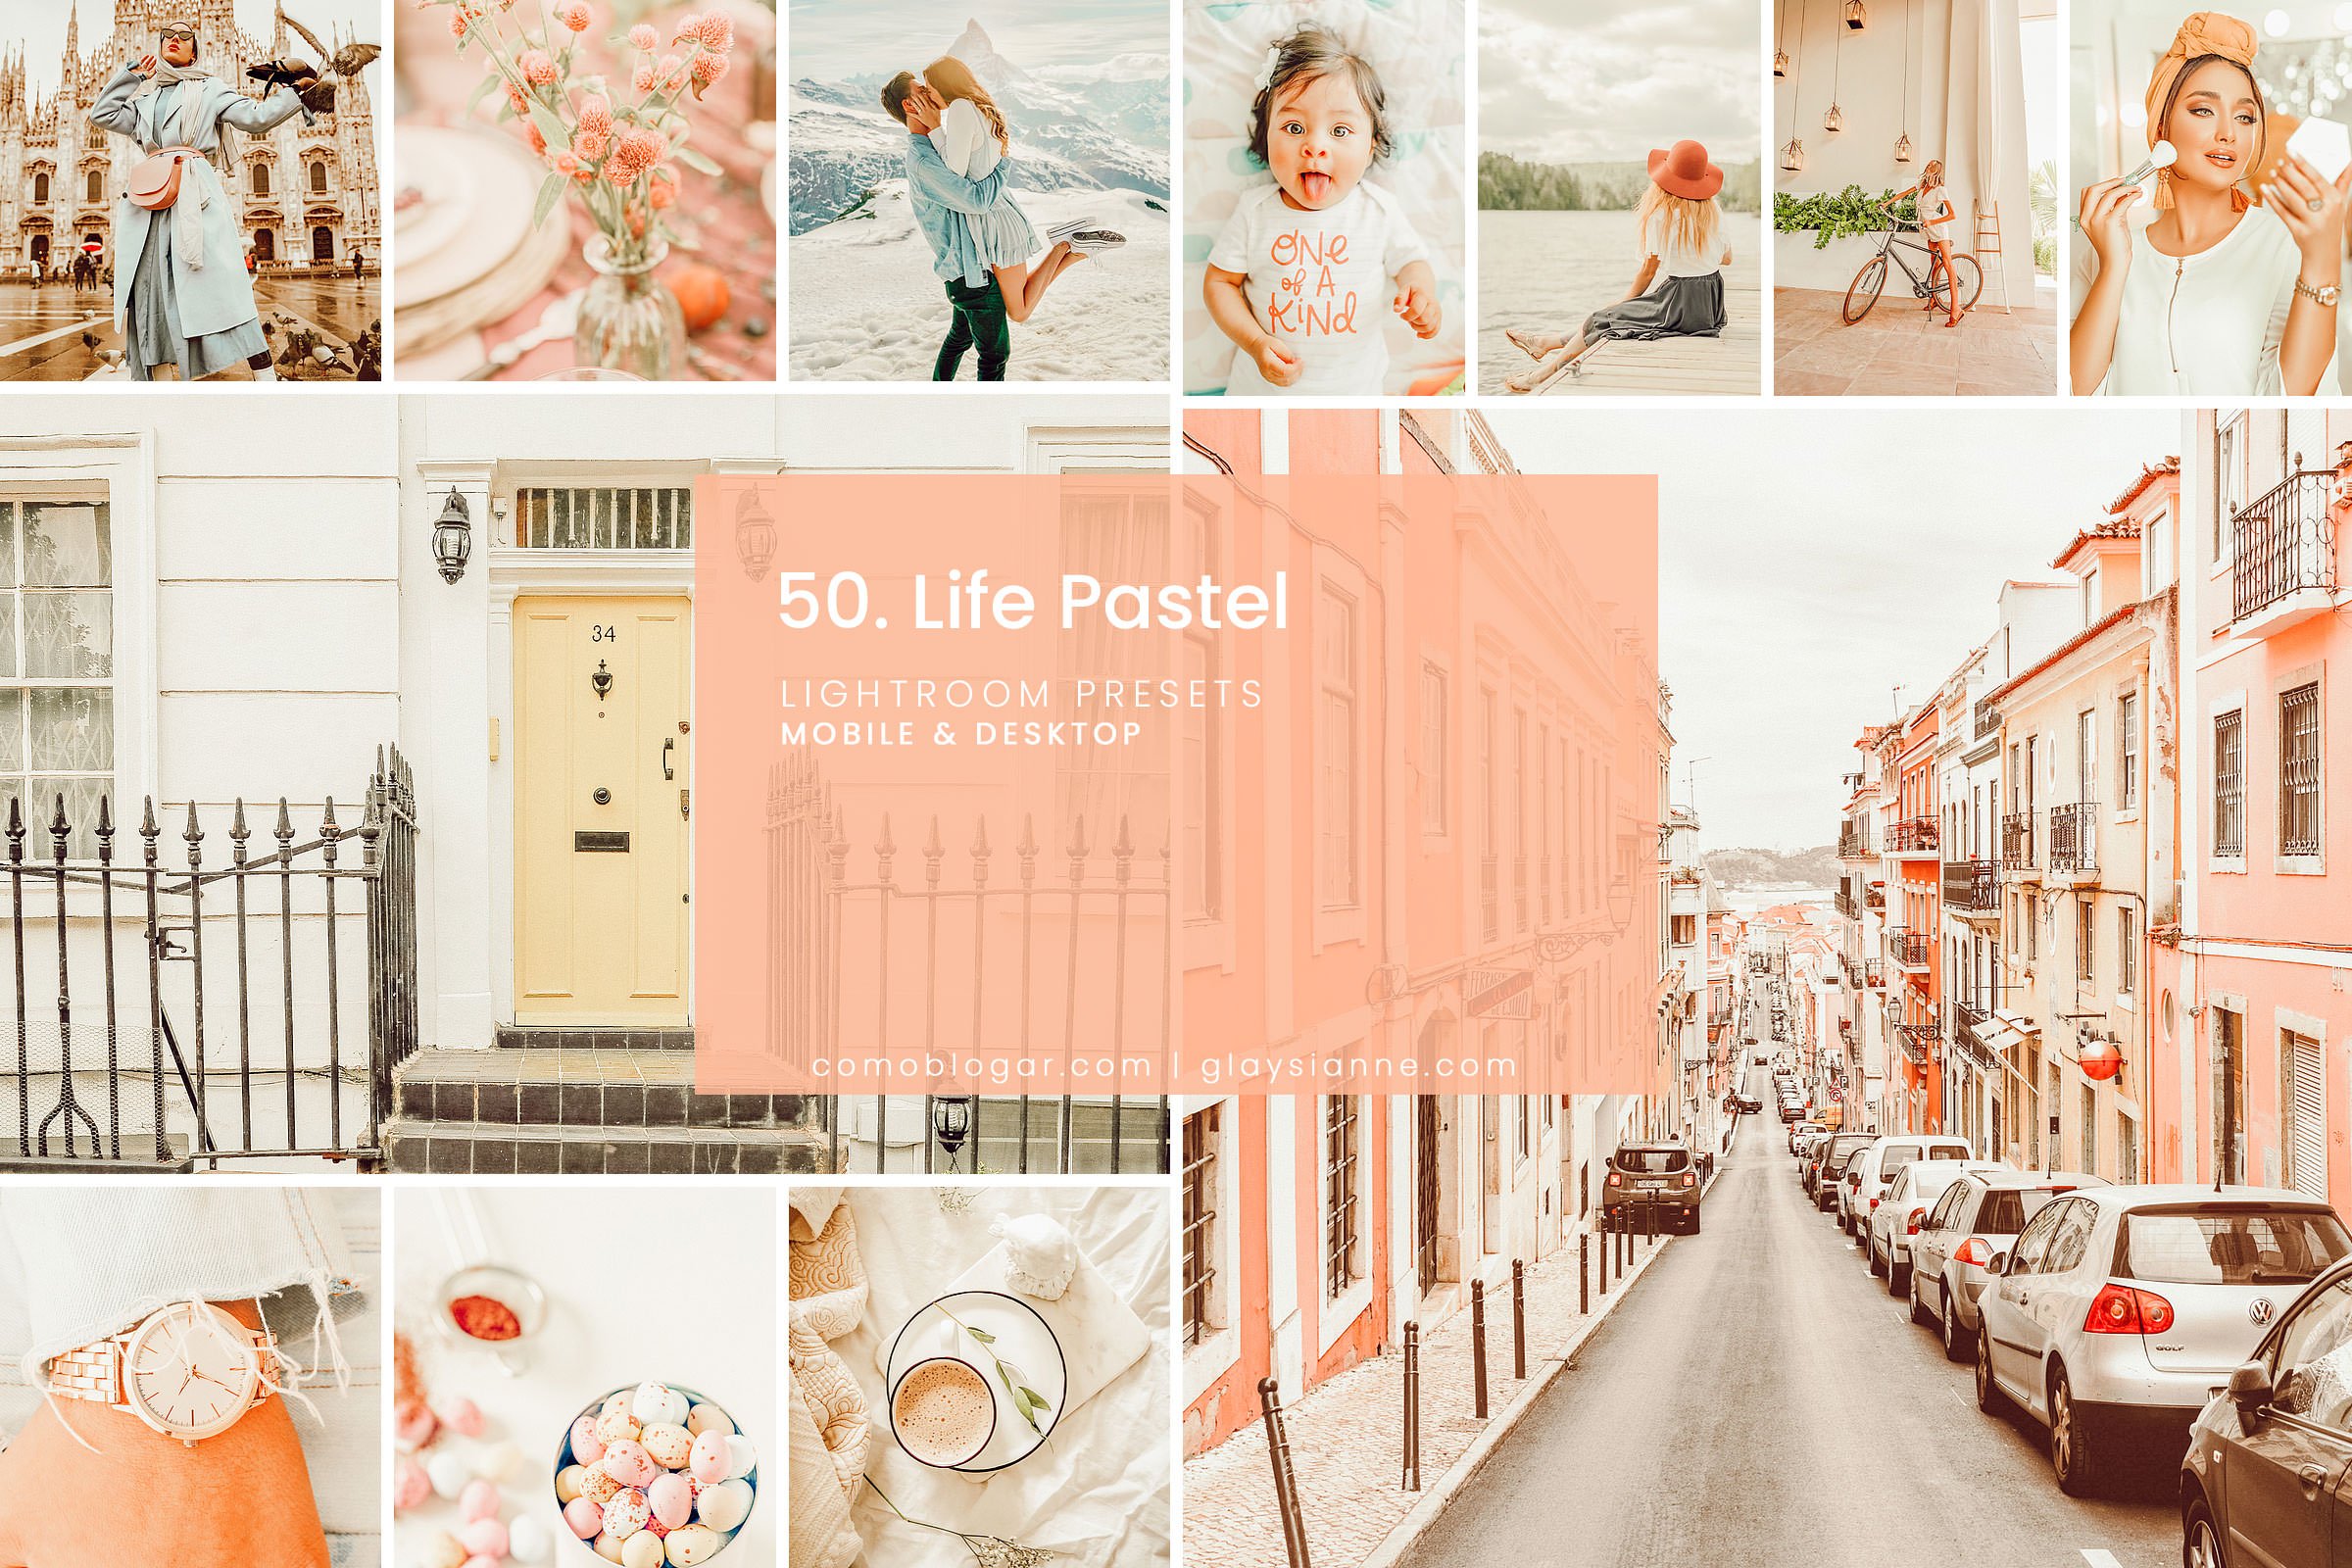 50. Life Pastelcover image.